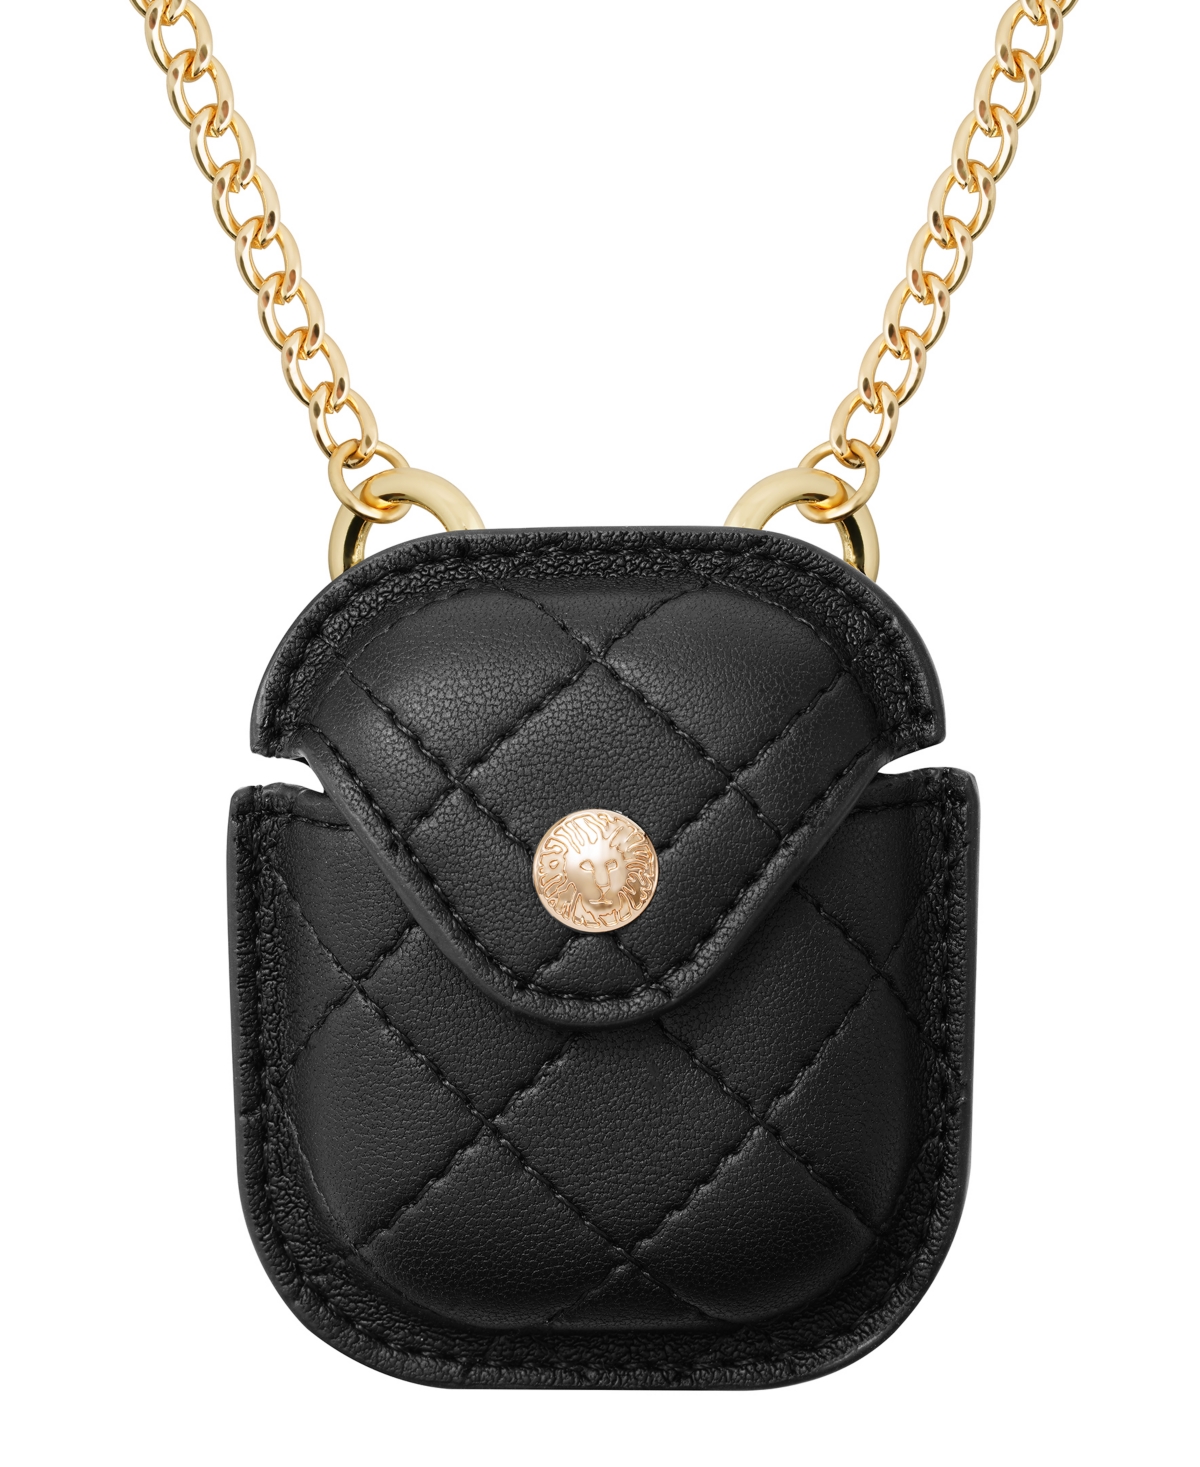 Anne Klein Women's Black Faux Leather Holder With Gold-tone Alloy Chain In Black/gold-tone